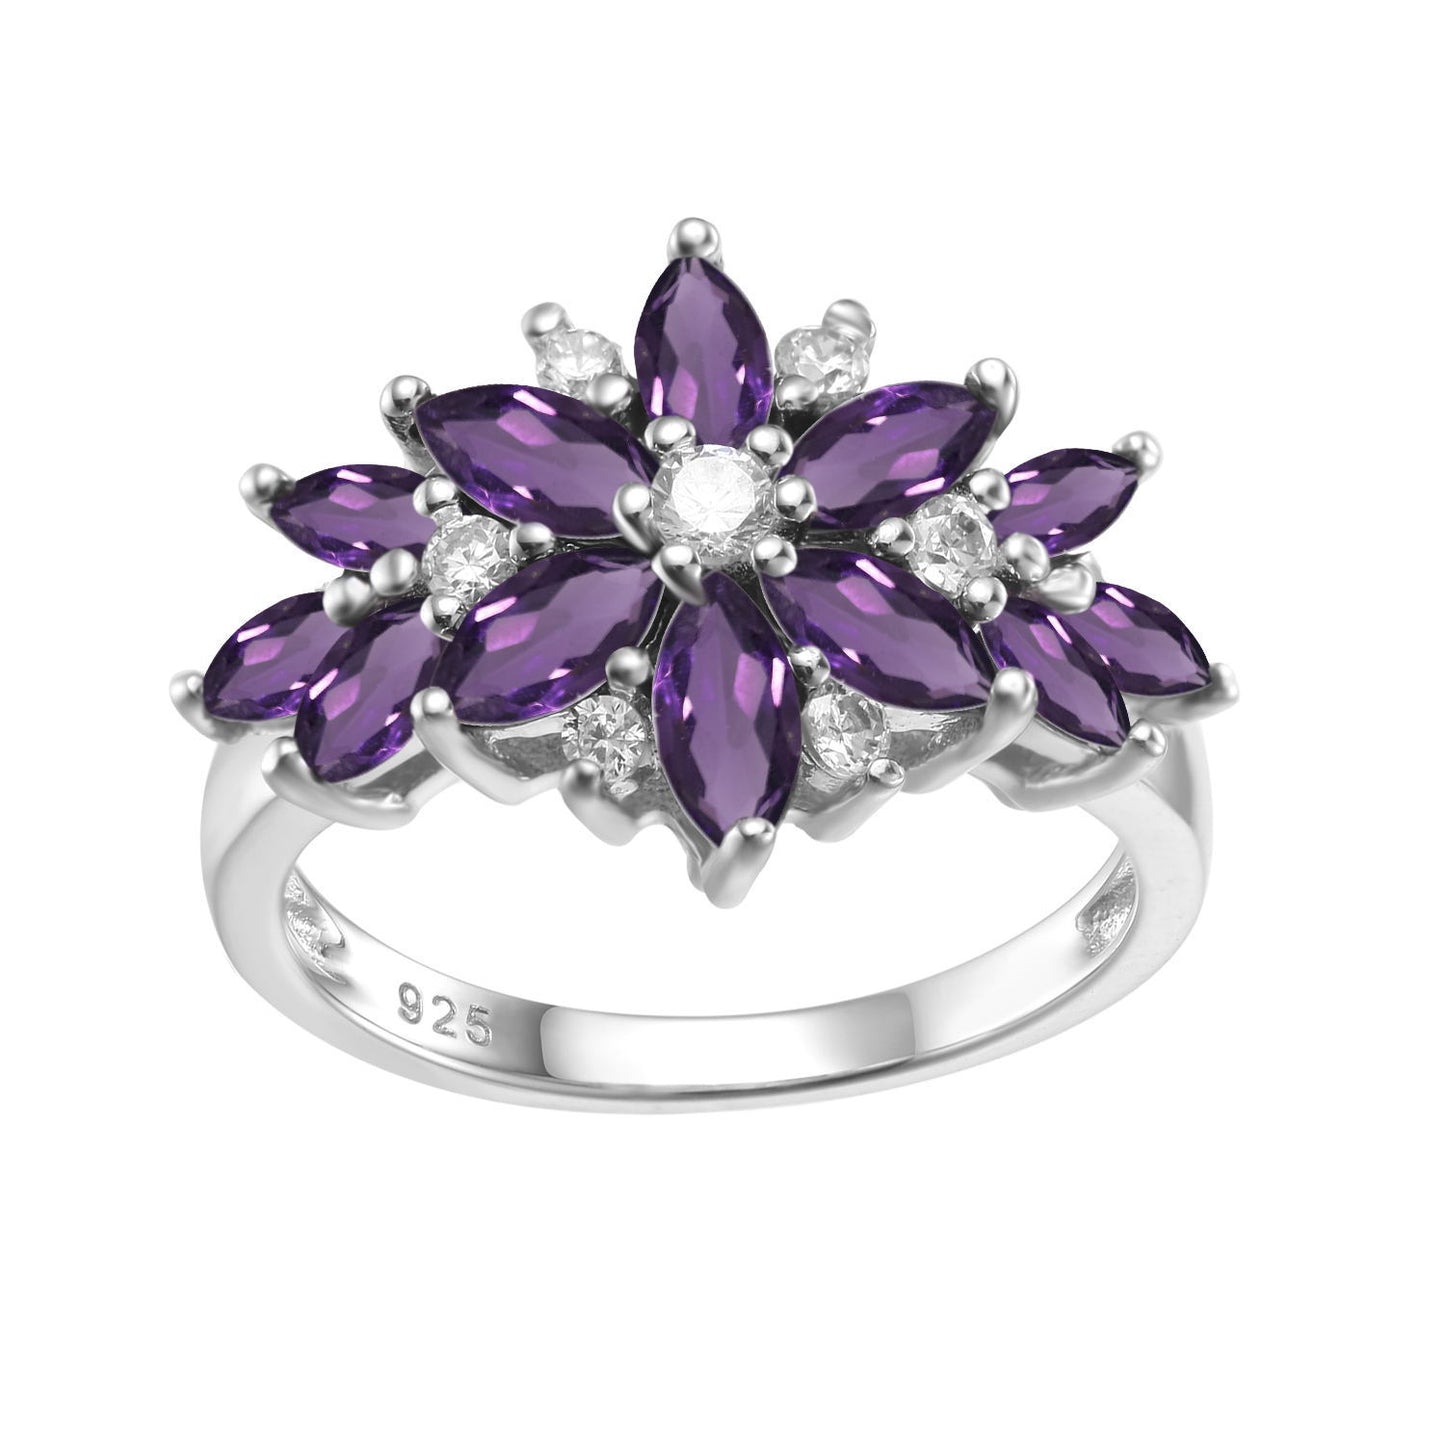 Luxury Fashion Design Natural Colourful Gemstone Flower Petals Sterling Silver Ring for Women